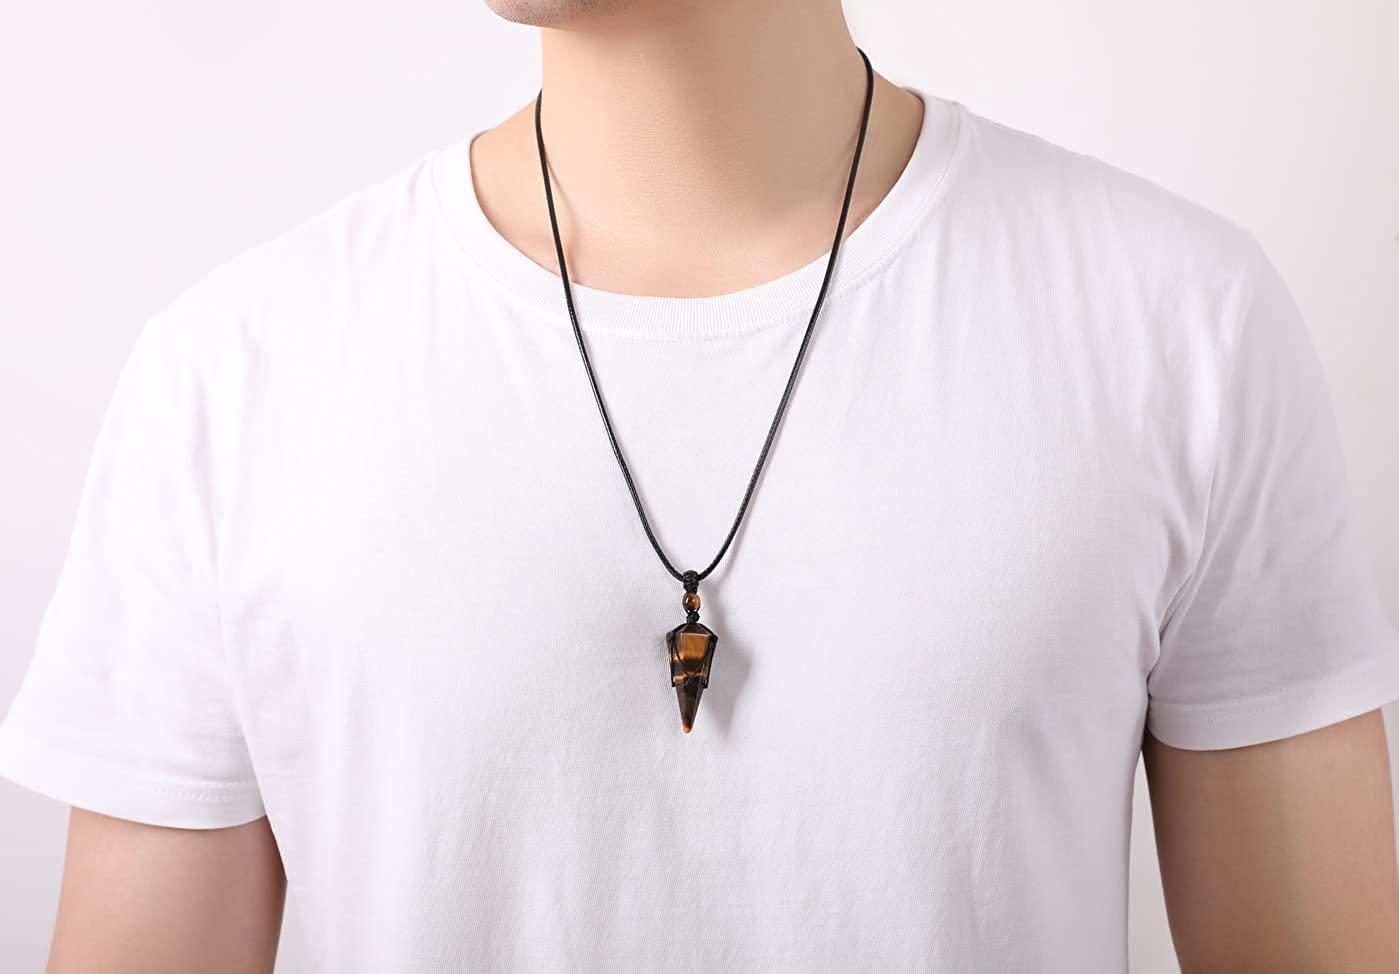 Natural Crystal Hexagon Column Healing Crystal Necklace Fashionable Leather  Chain Jewelry For Men And Women, Perfect Small Gift From Sevenstonejewelry,  $0.97 | DHgate.Com